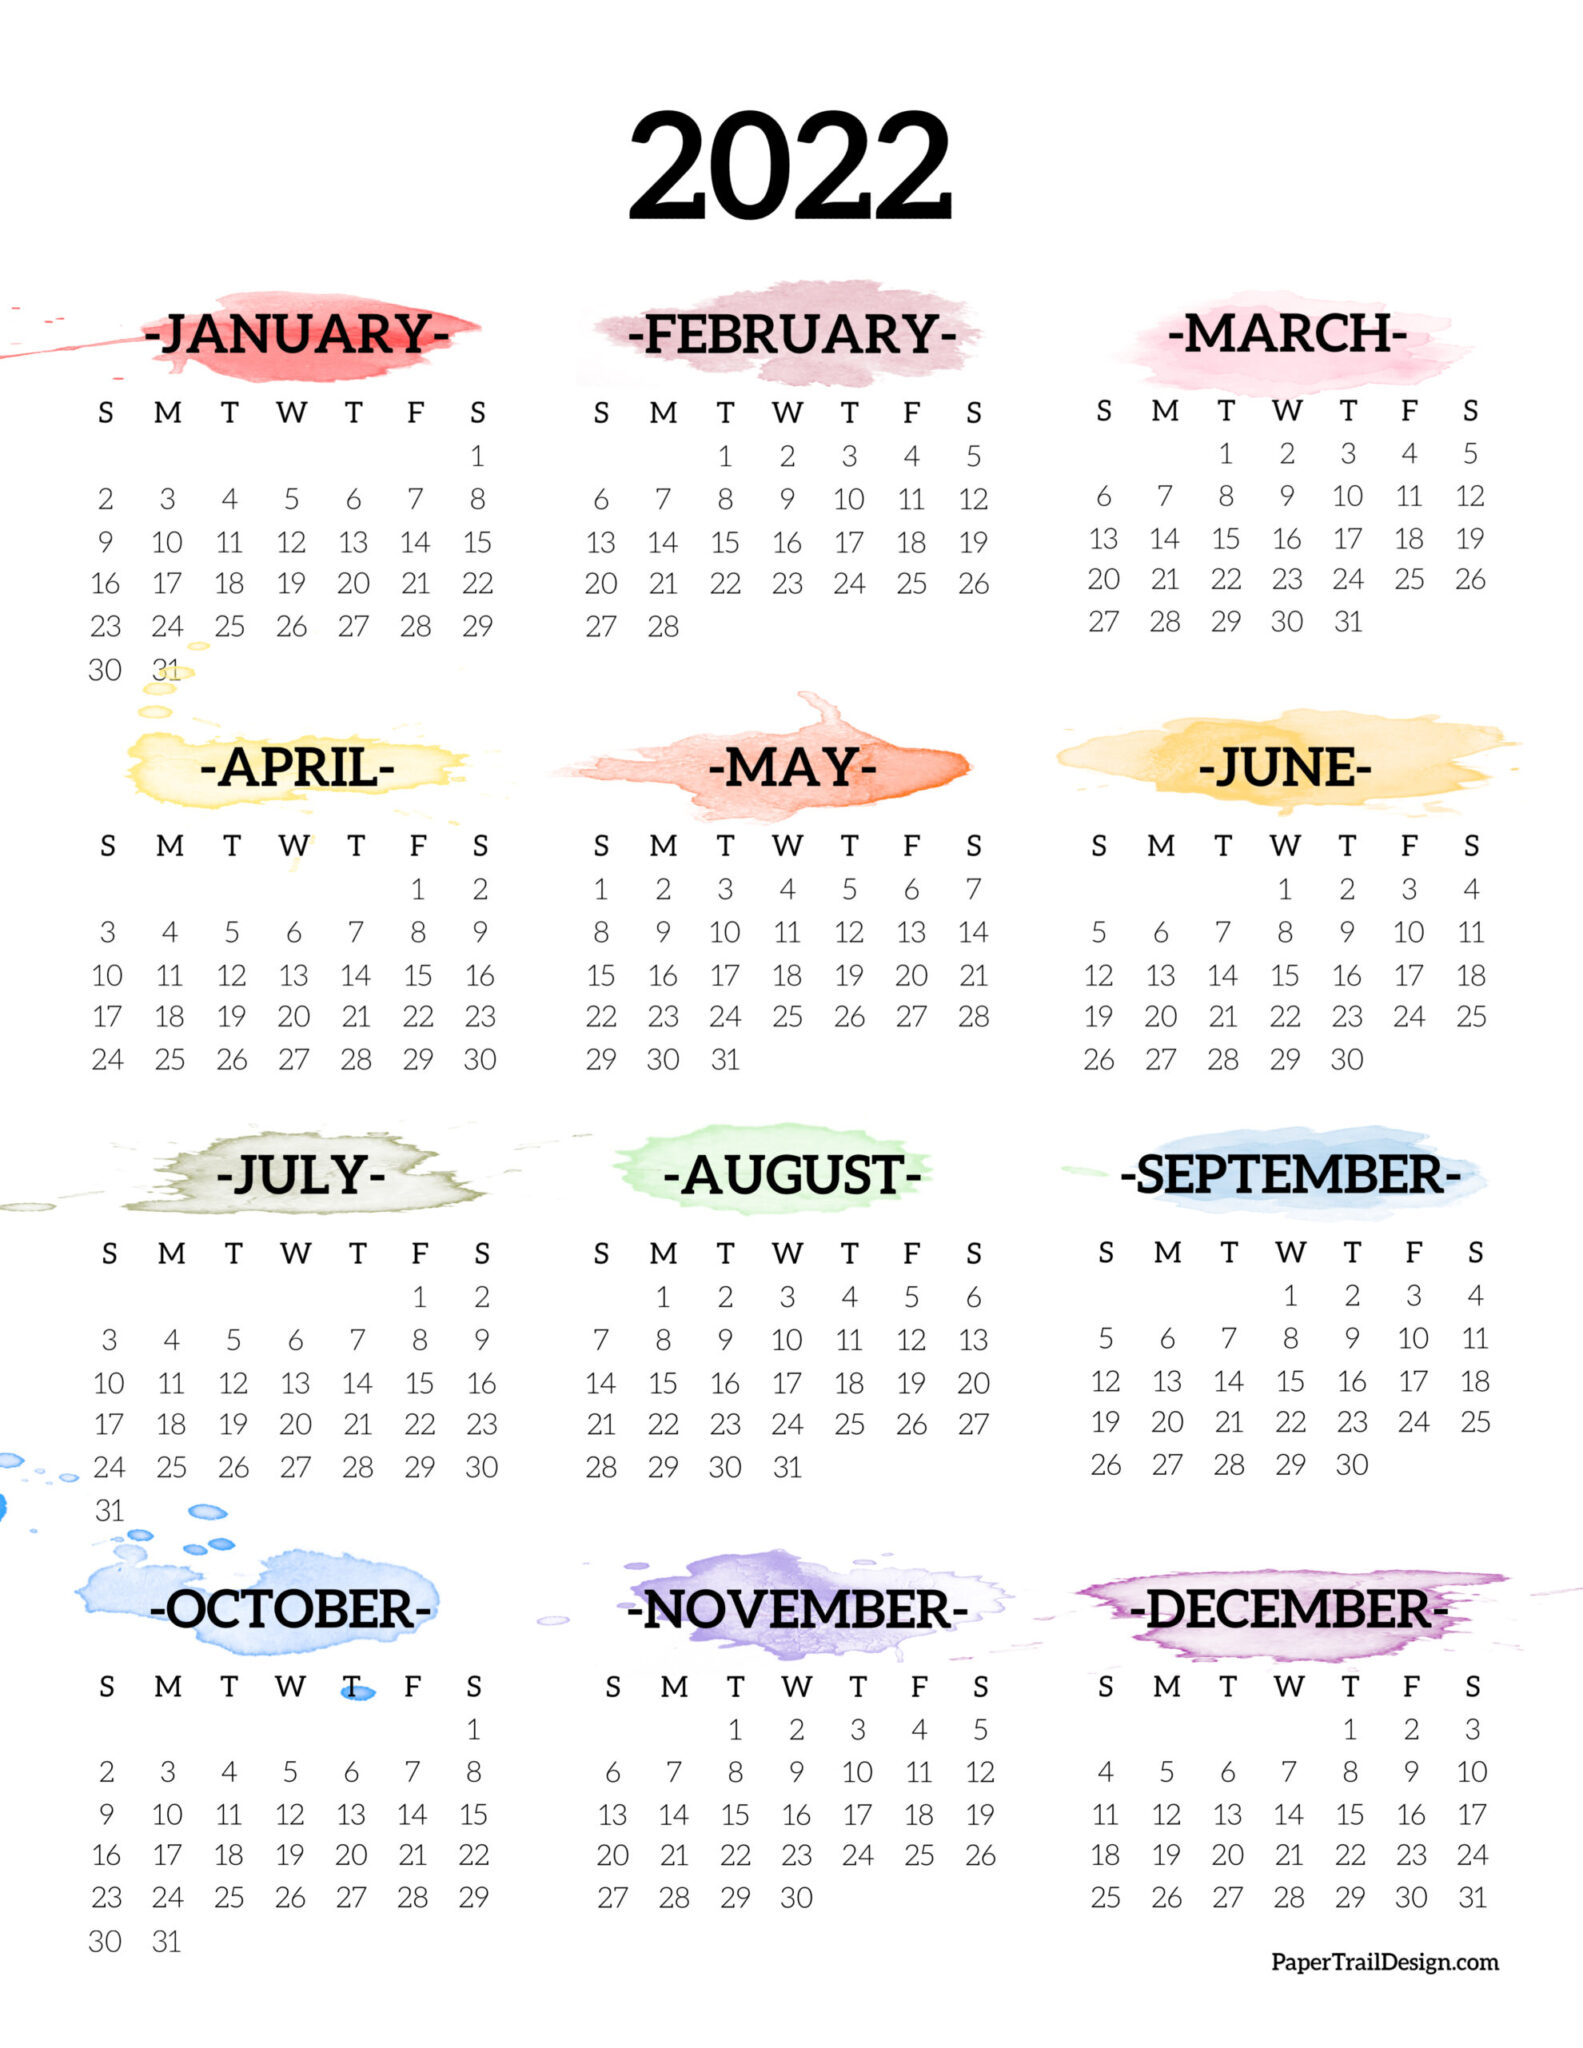 2022 One Page Calendar Printable  Watercolor | Paper Trail Design intended for 2022 Fiscal Calendar Printable